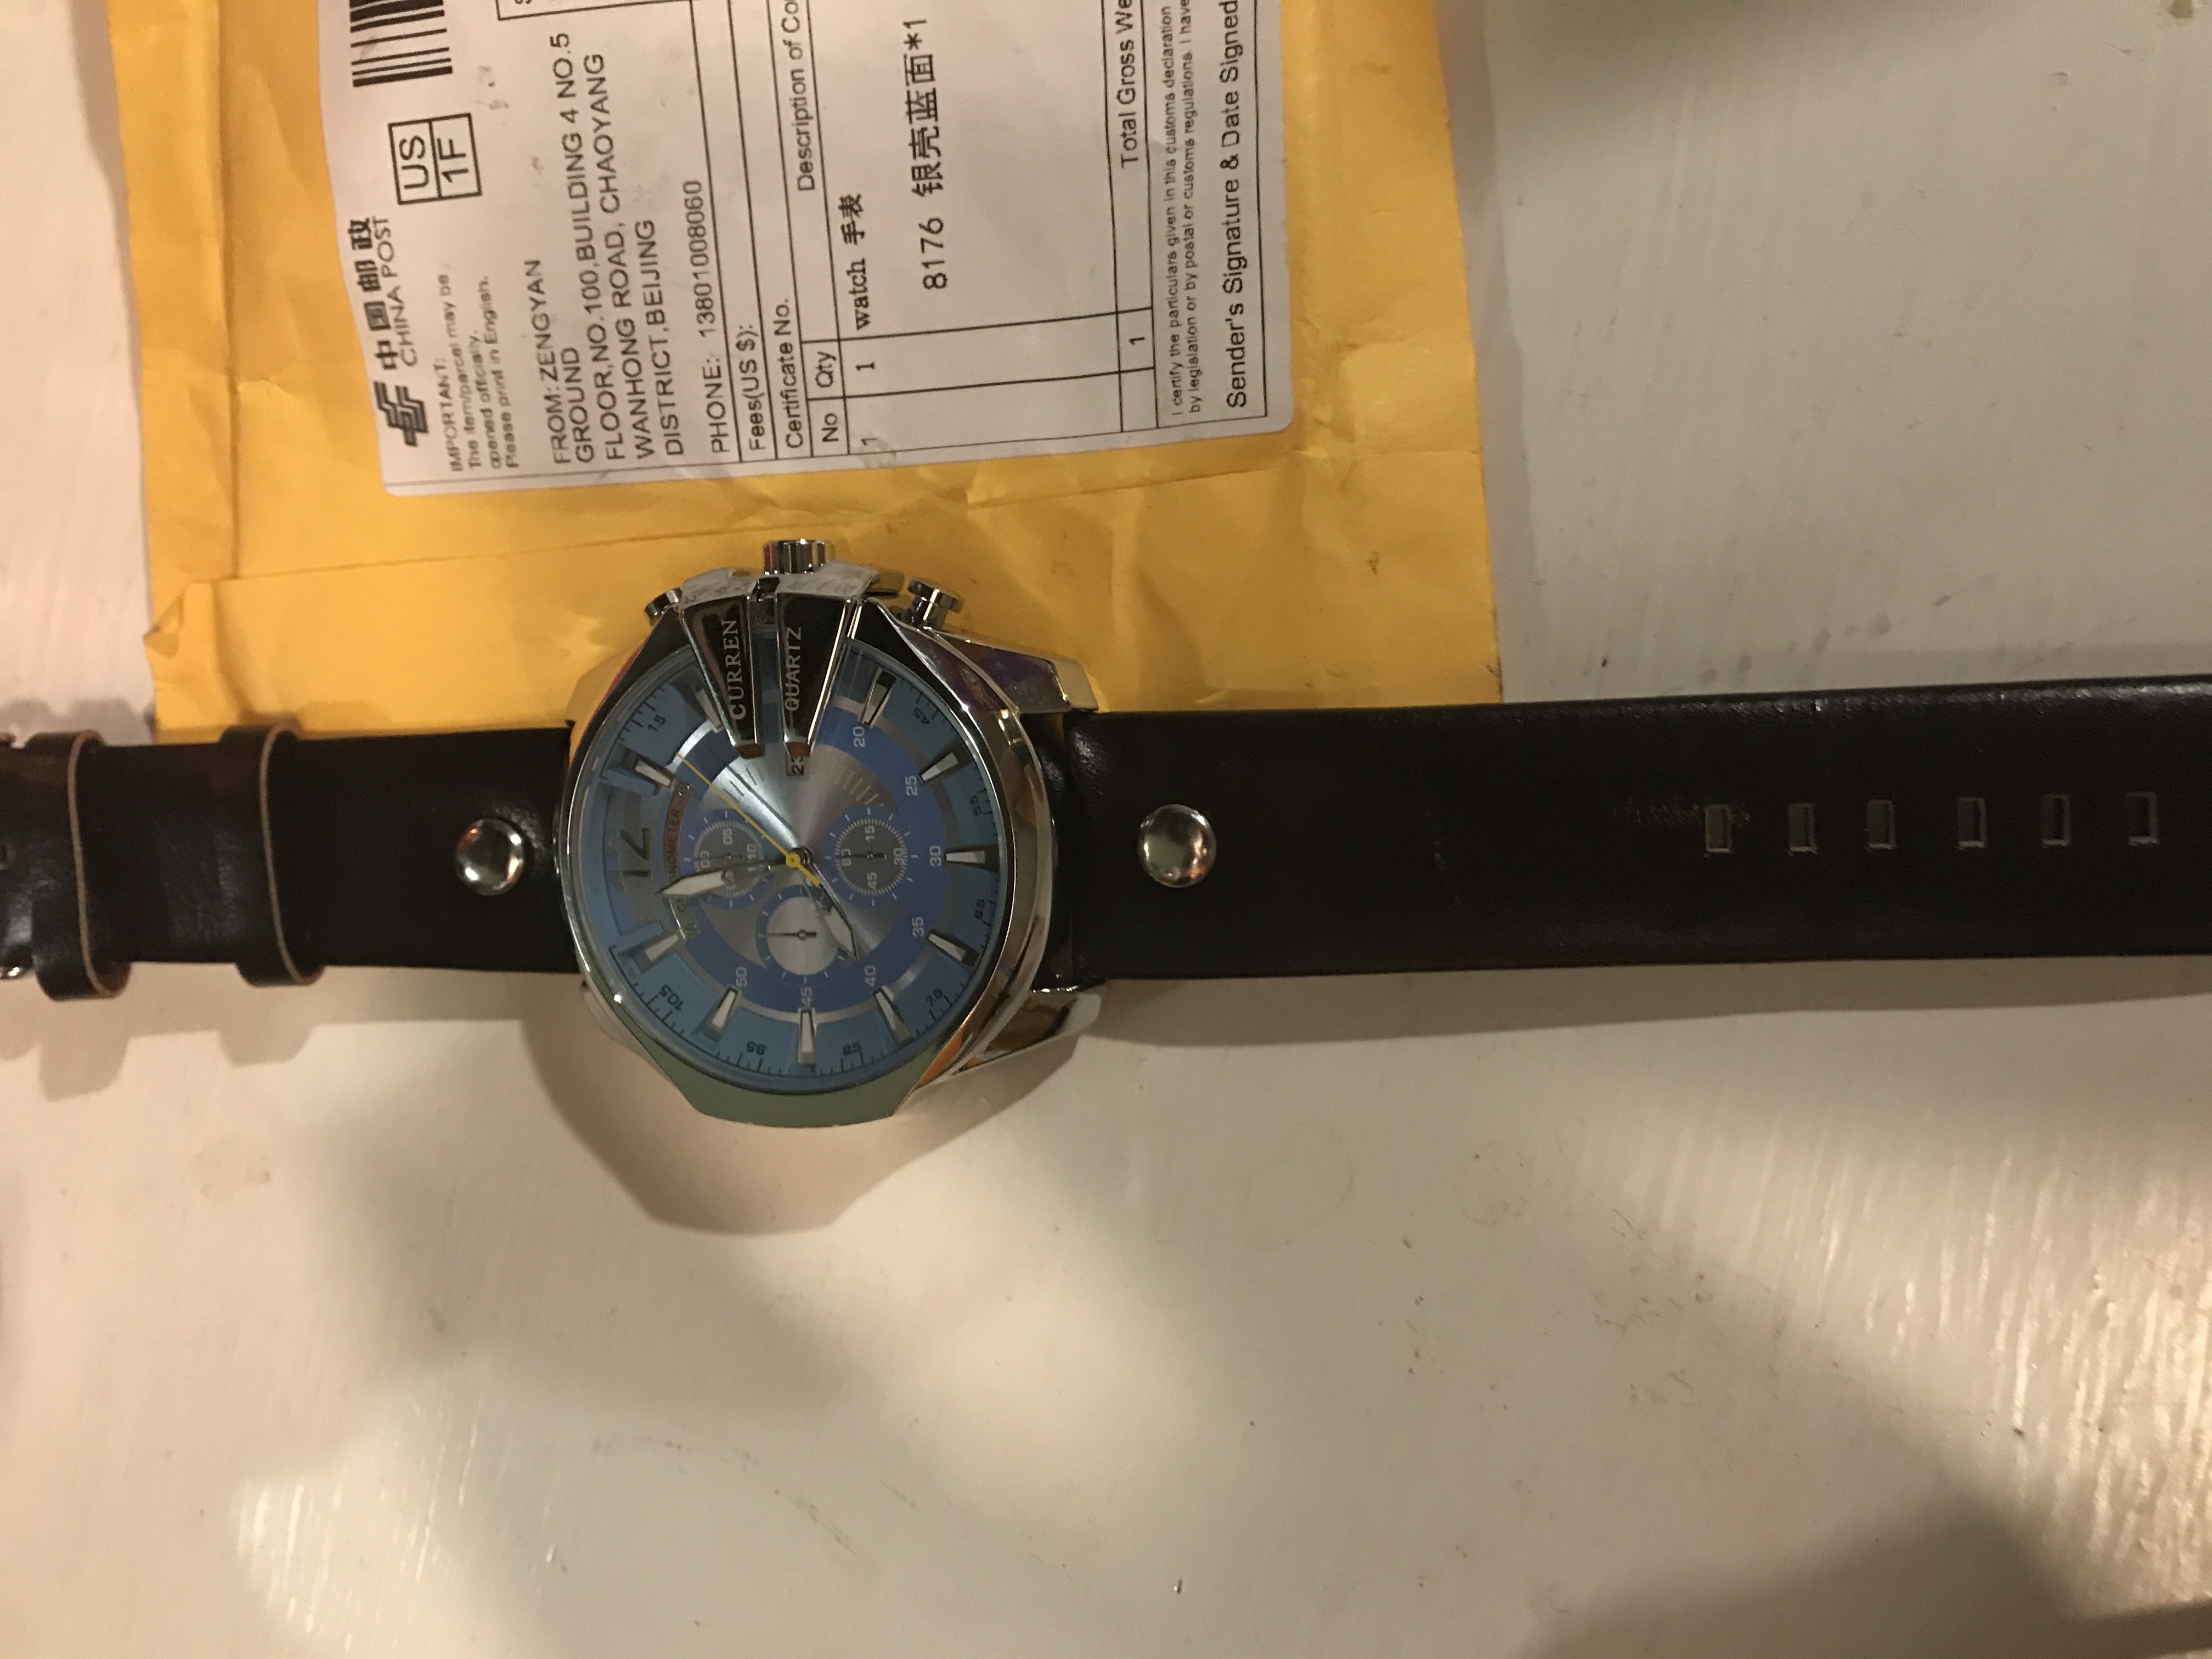 Fake watch with no functions. Finish wearing off after one use. no refunds. scam!